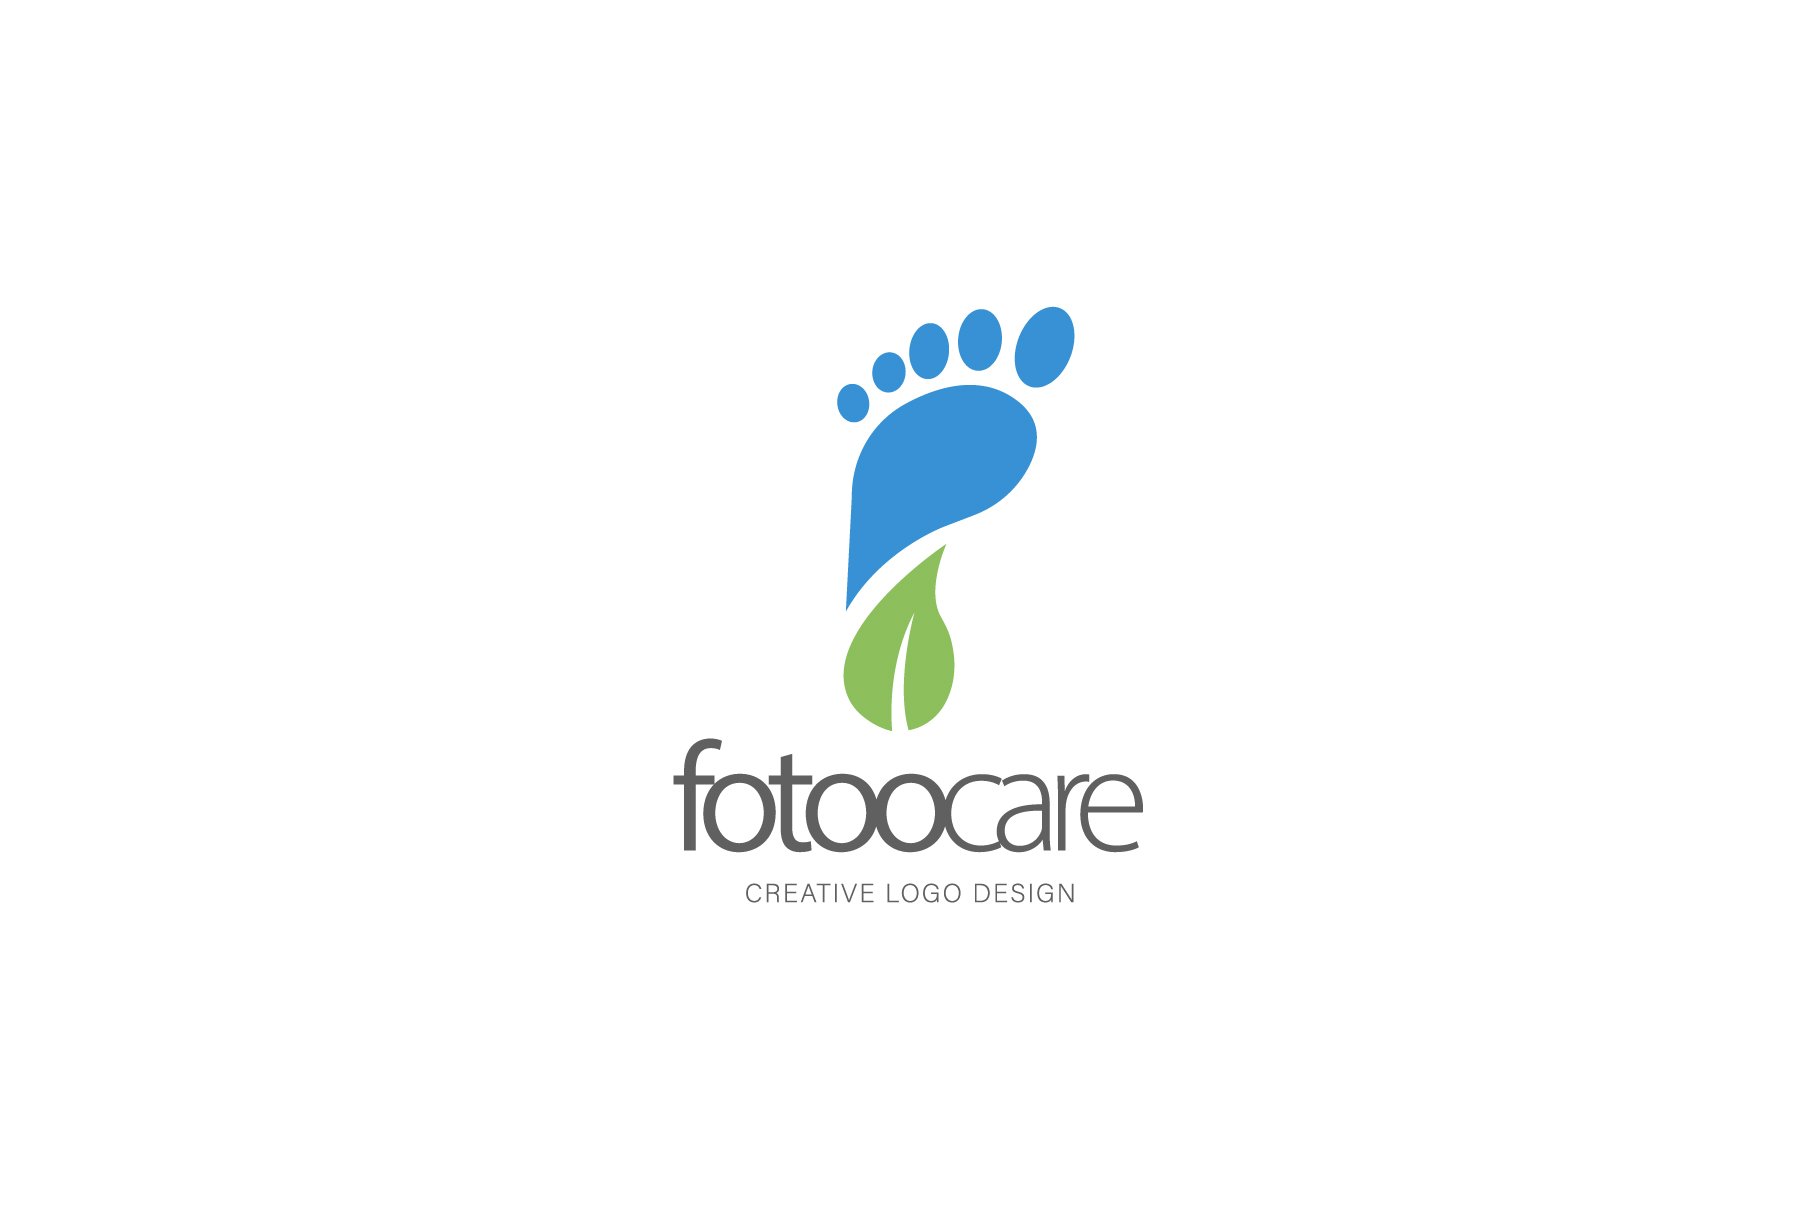 foot care logo cover image.